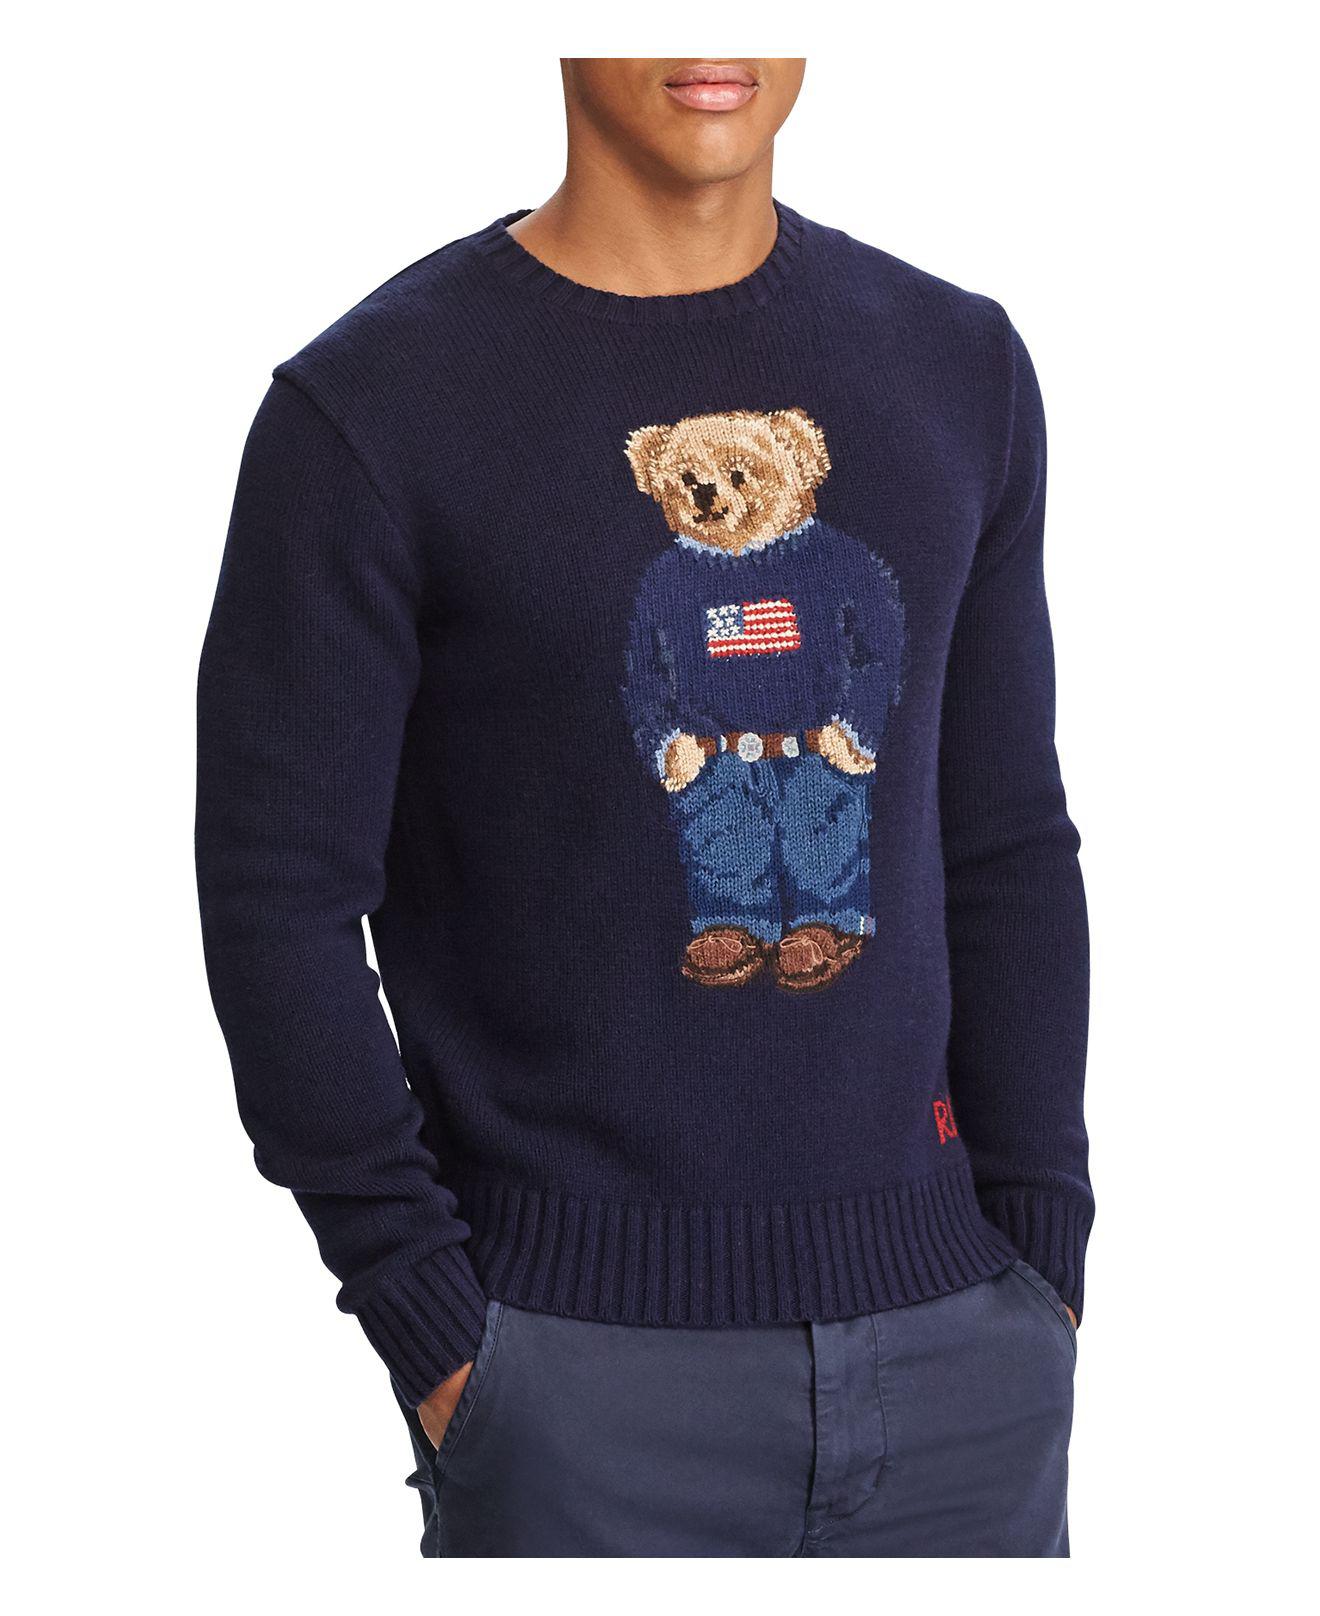 Polo Ralph Lauren Iconic Polo Bear Sweater in Navy (Blue) for Men - Lyst